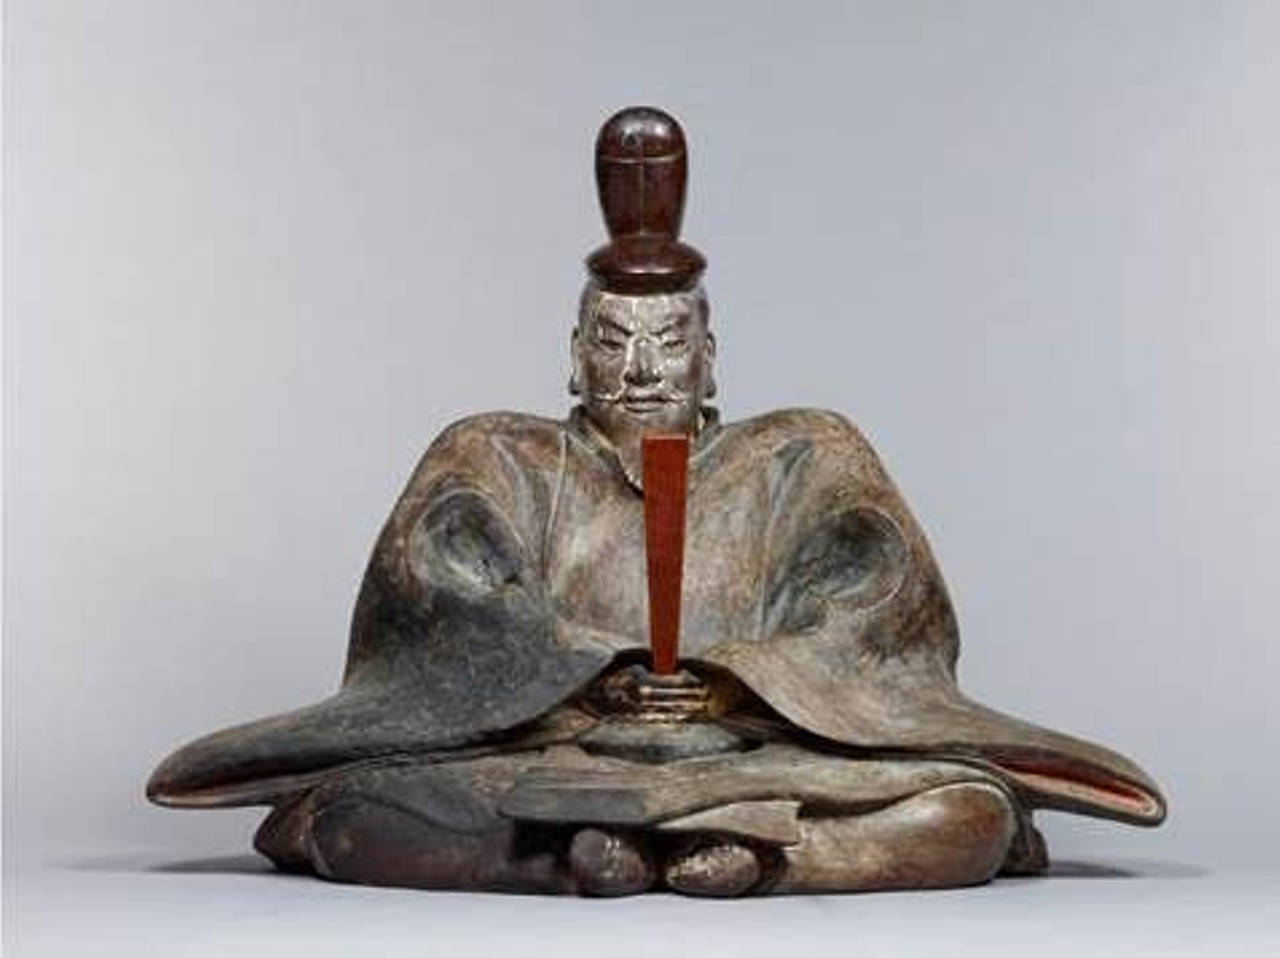  'Shinto: Discovery of the Divine in Japanese Art' Opens at CMA
Thu, March 23
Courtesy of the Cleveland Museum of Art